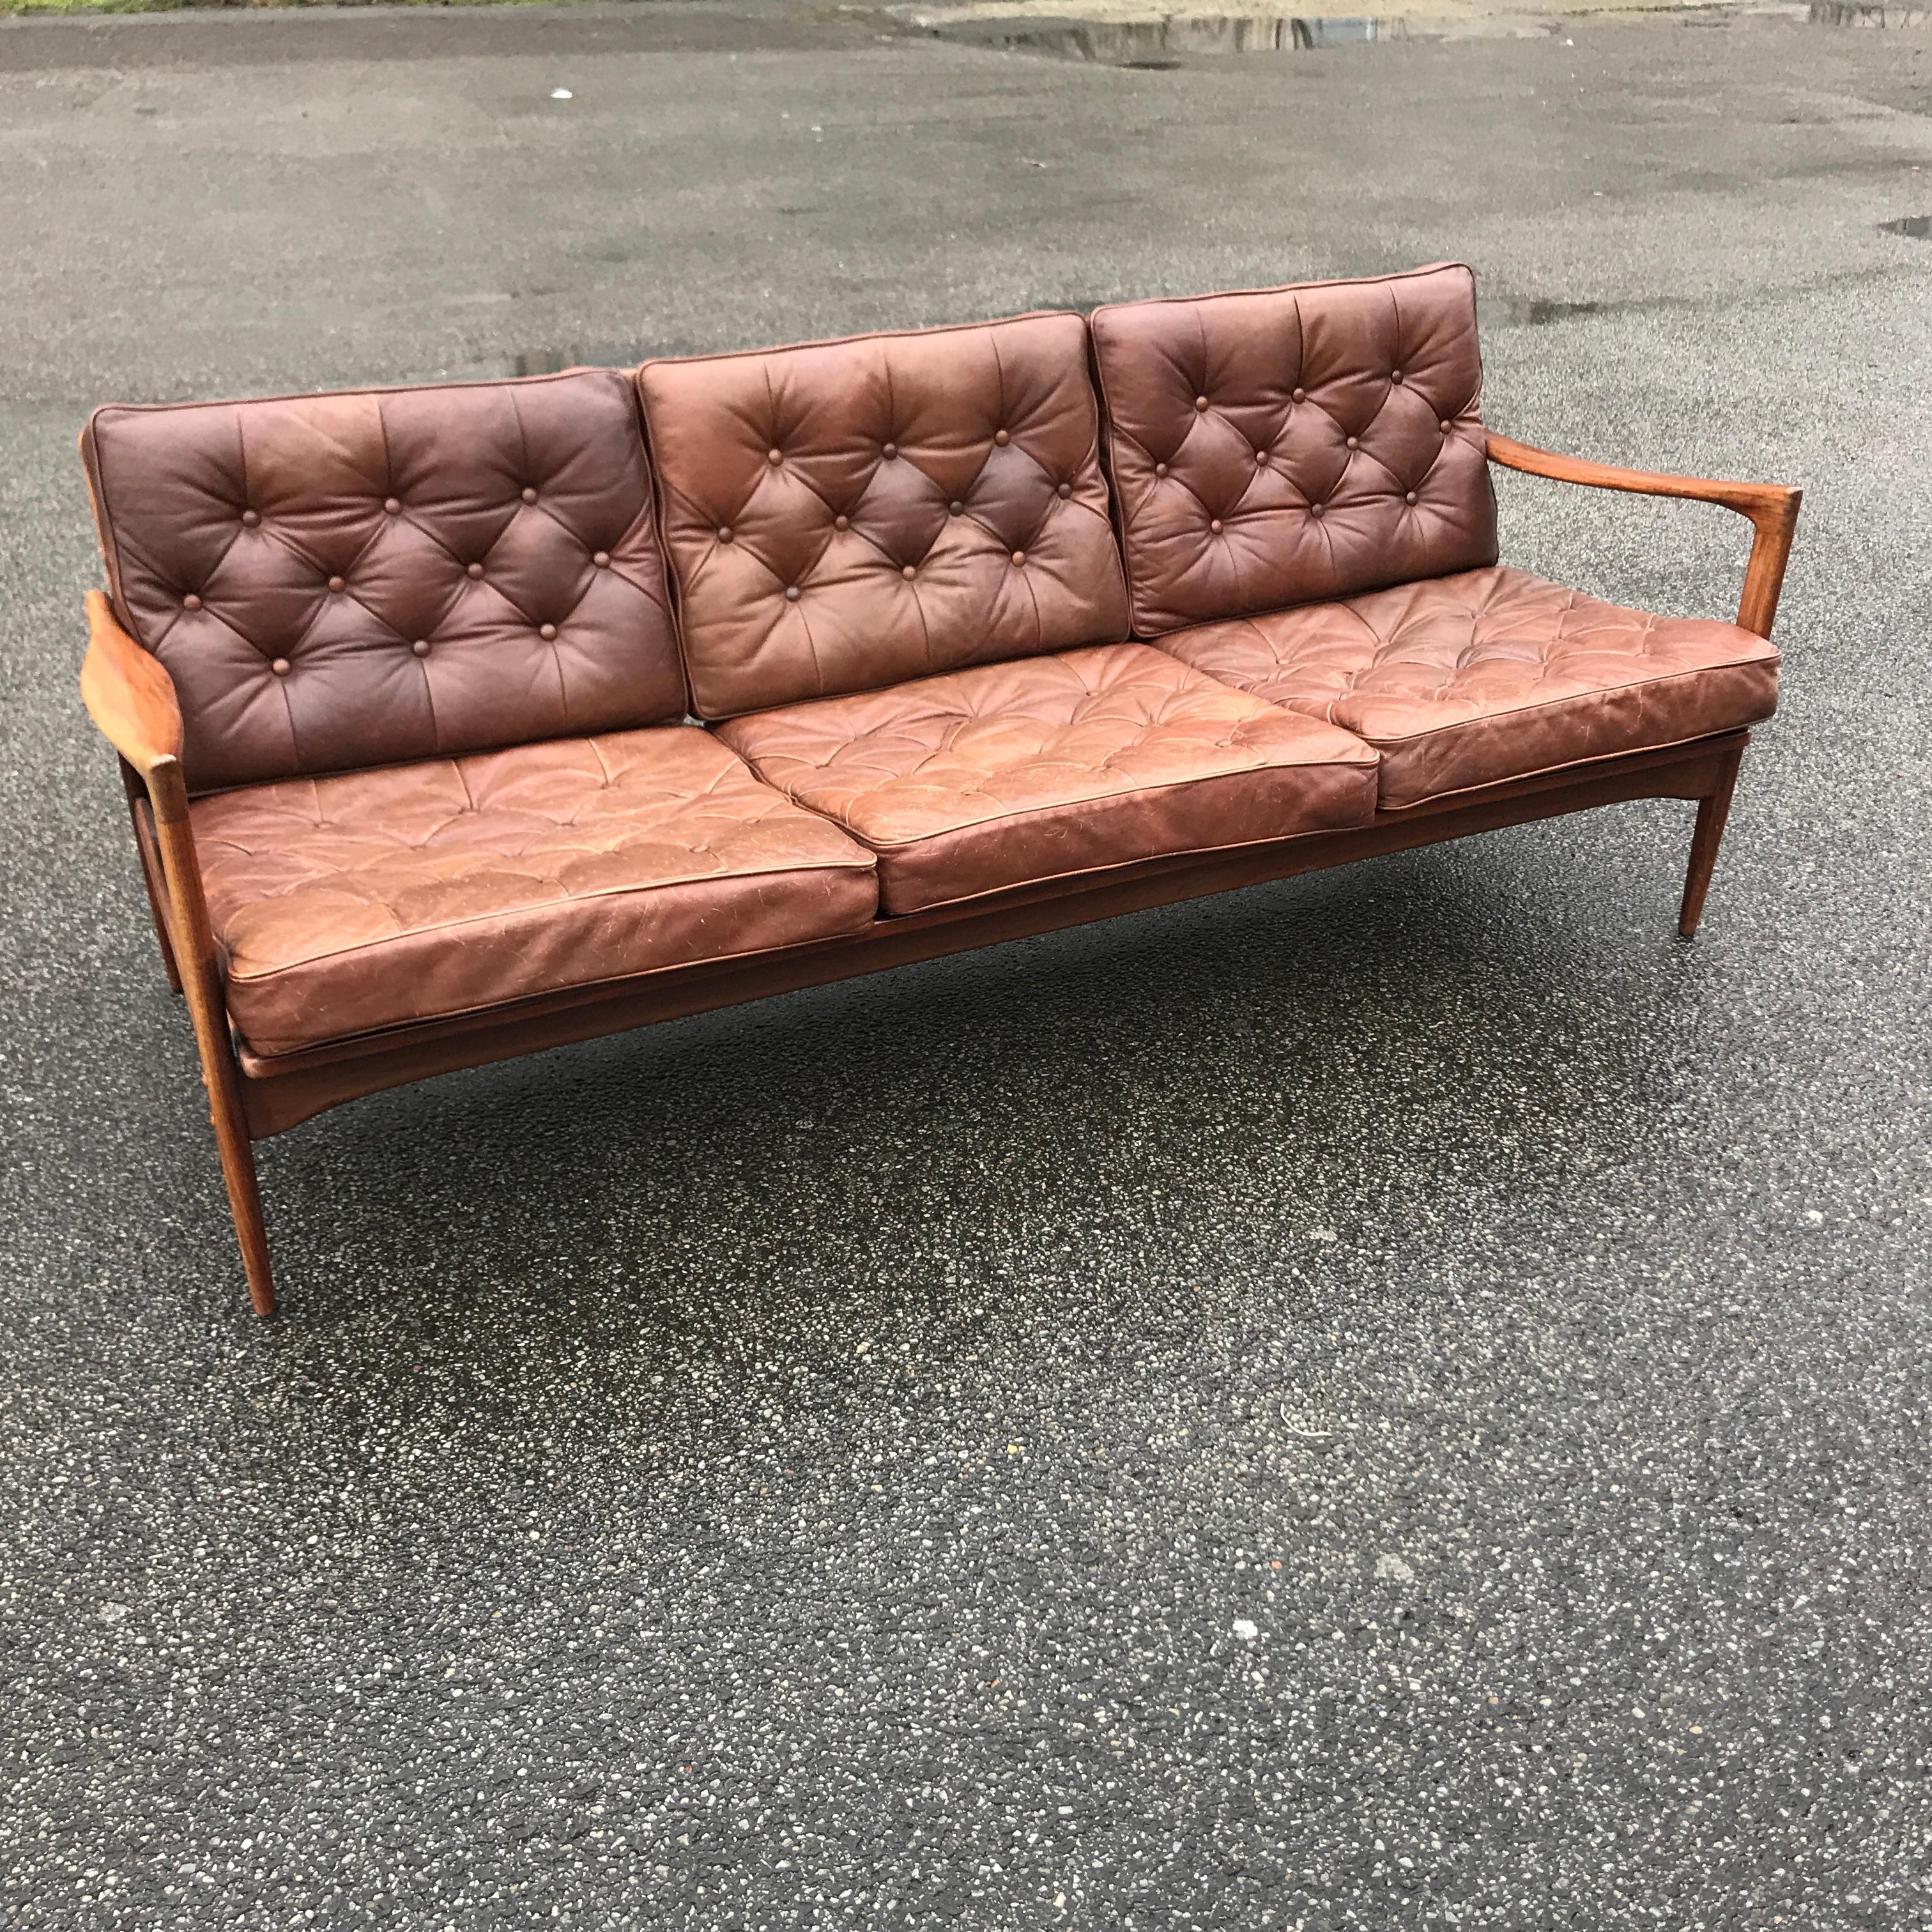 A stunning Mid-Century Modern vintage sofa from Ib Kofoed Larsen. The model `Kandidaten` stands out as a perfect piece of vintage Danish Design history.